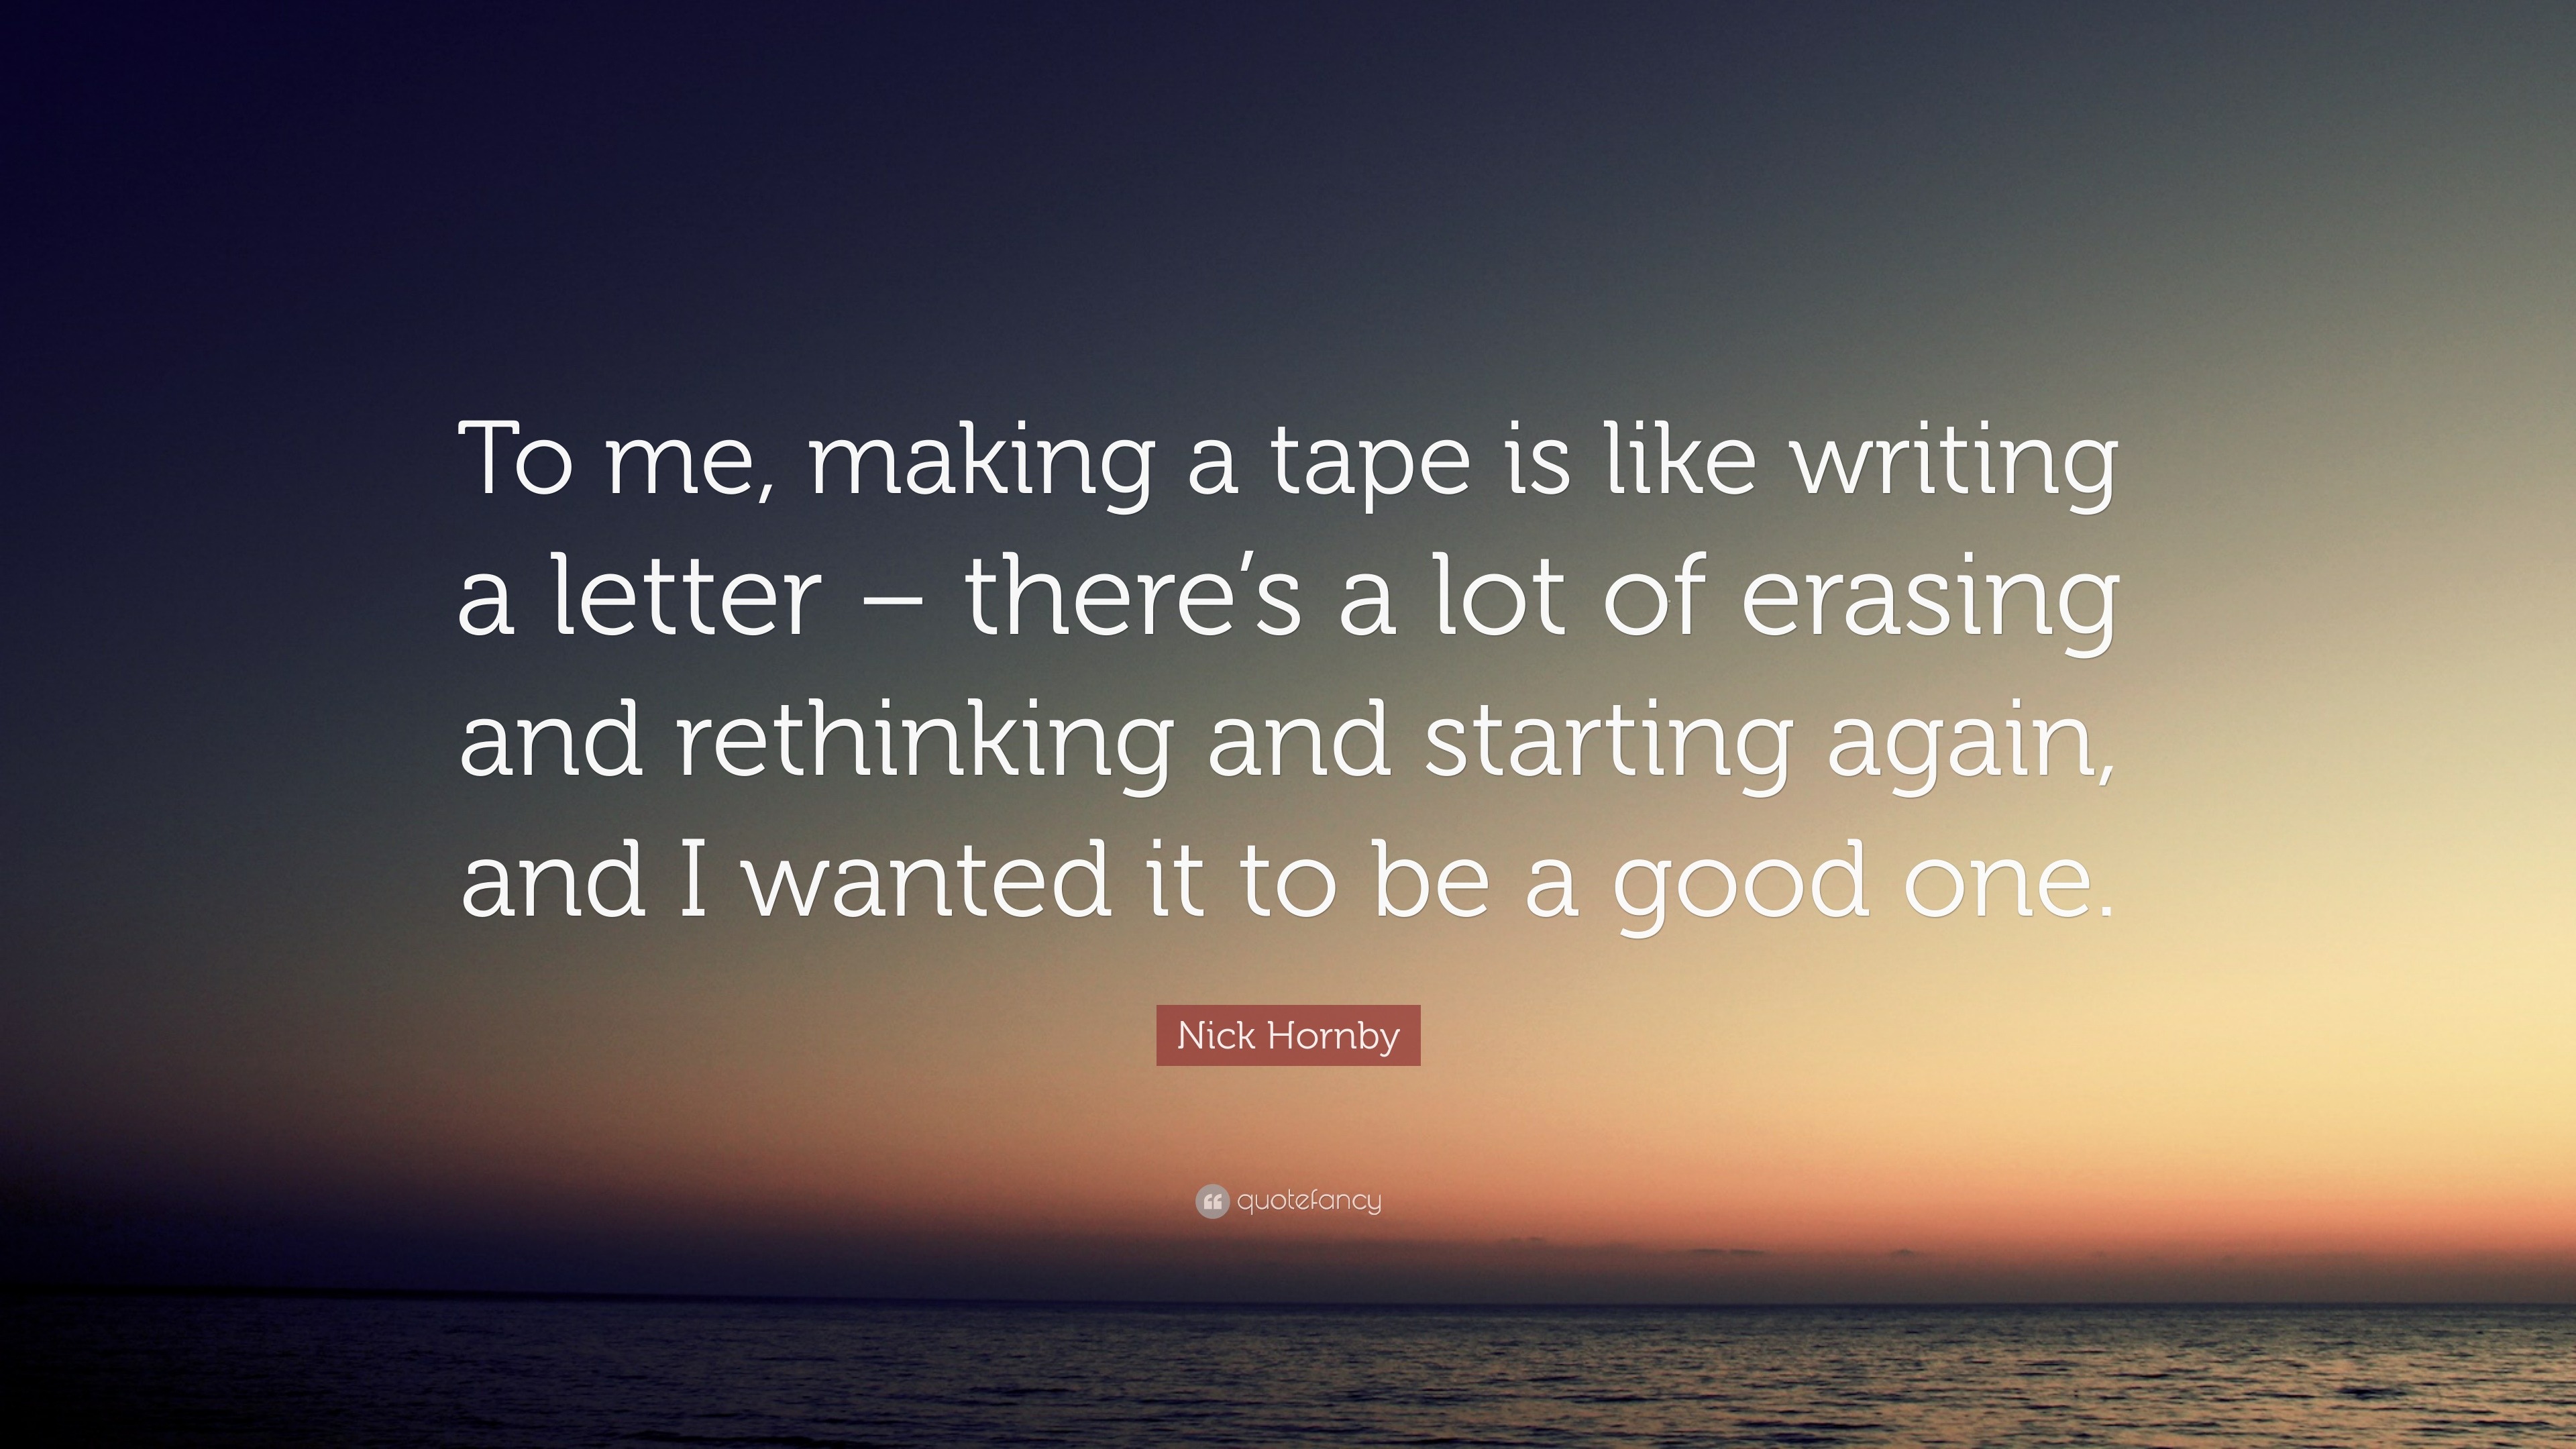 Nick Hornby Quote: “To me, making a tape is like writing a letter – there's  a lot of erasing and rethinking and starting again, and I wanted”